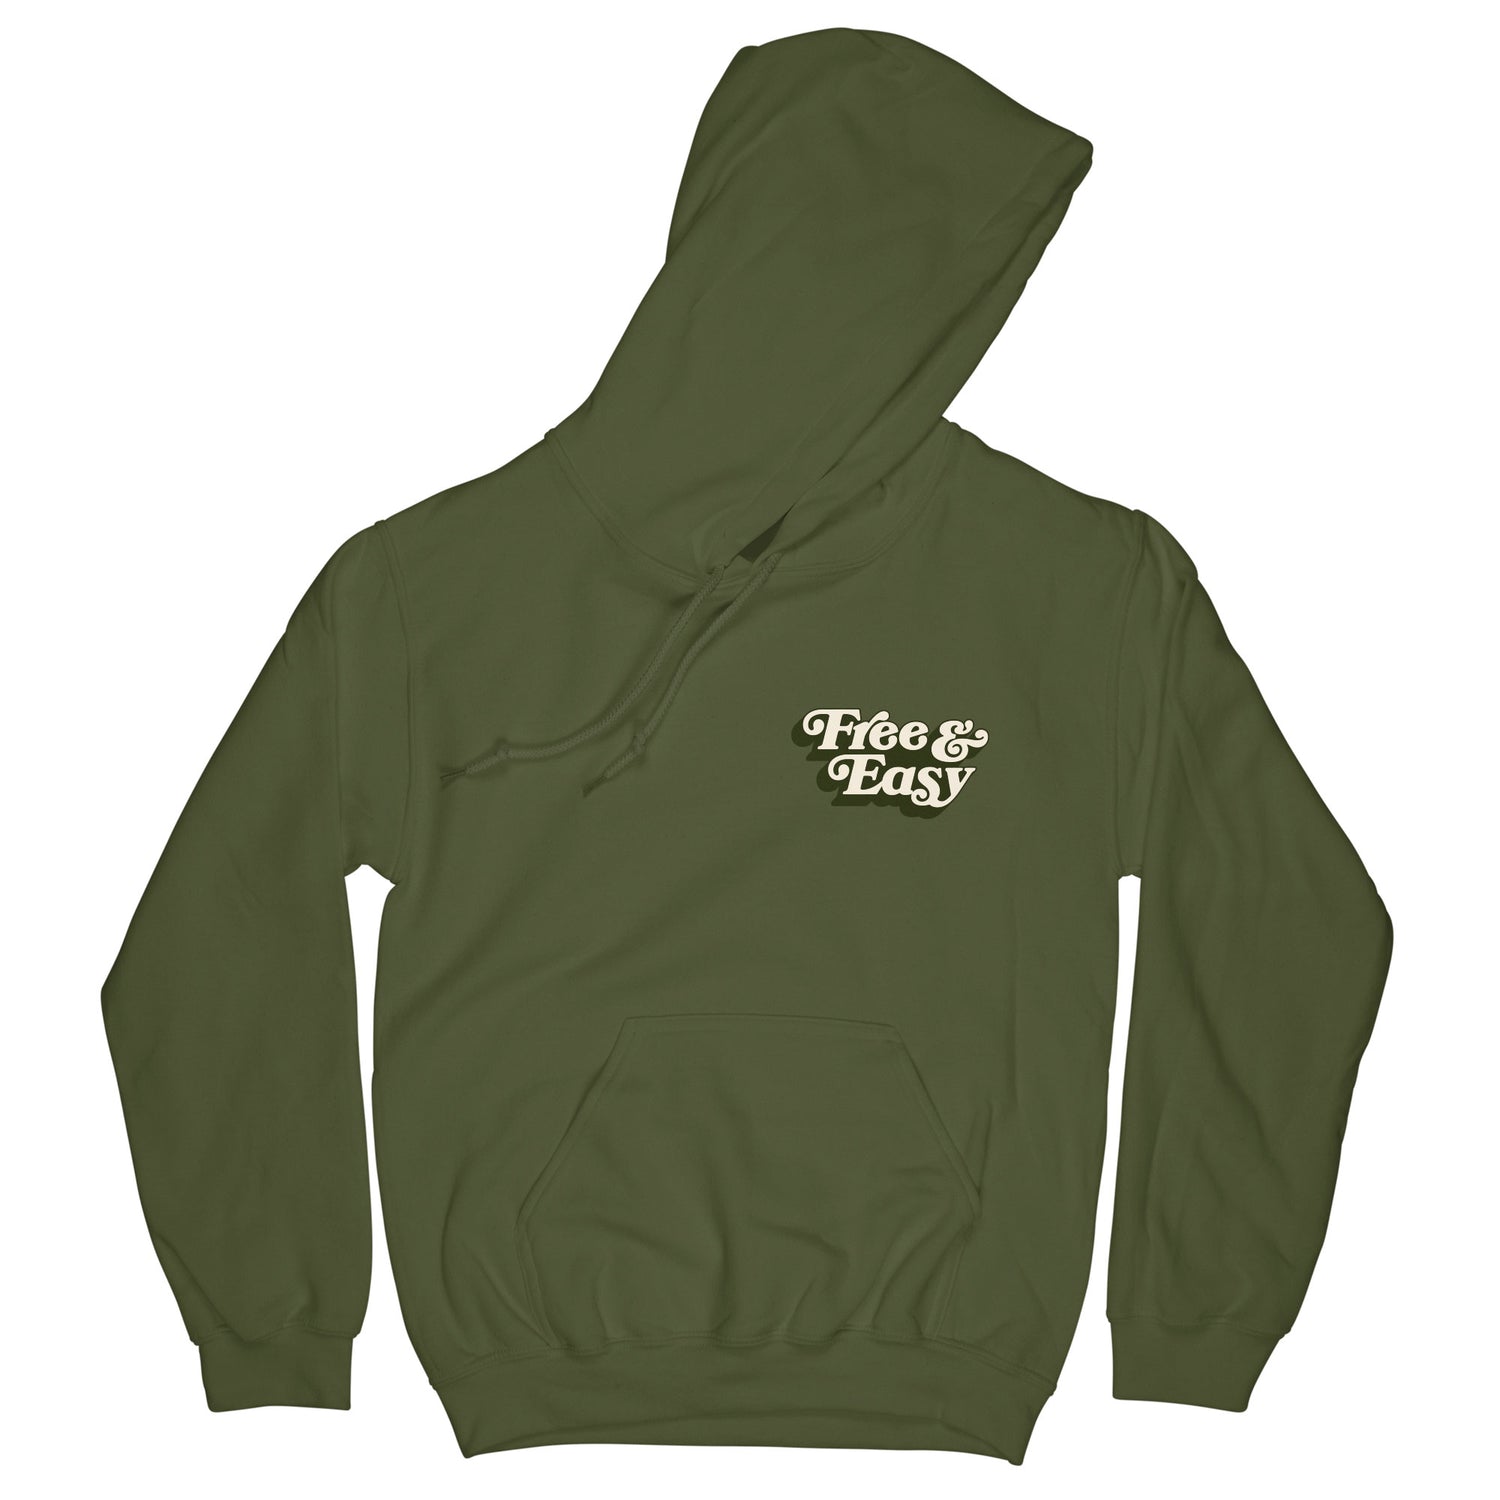 Don't Trip OG Hoodie in olive green with white and green Free & Easy logo design on front left side on a white background - Free & Easy